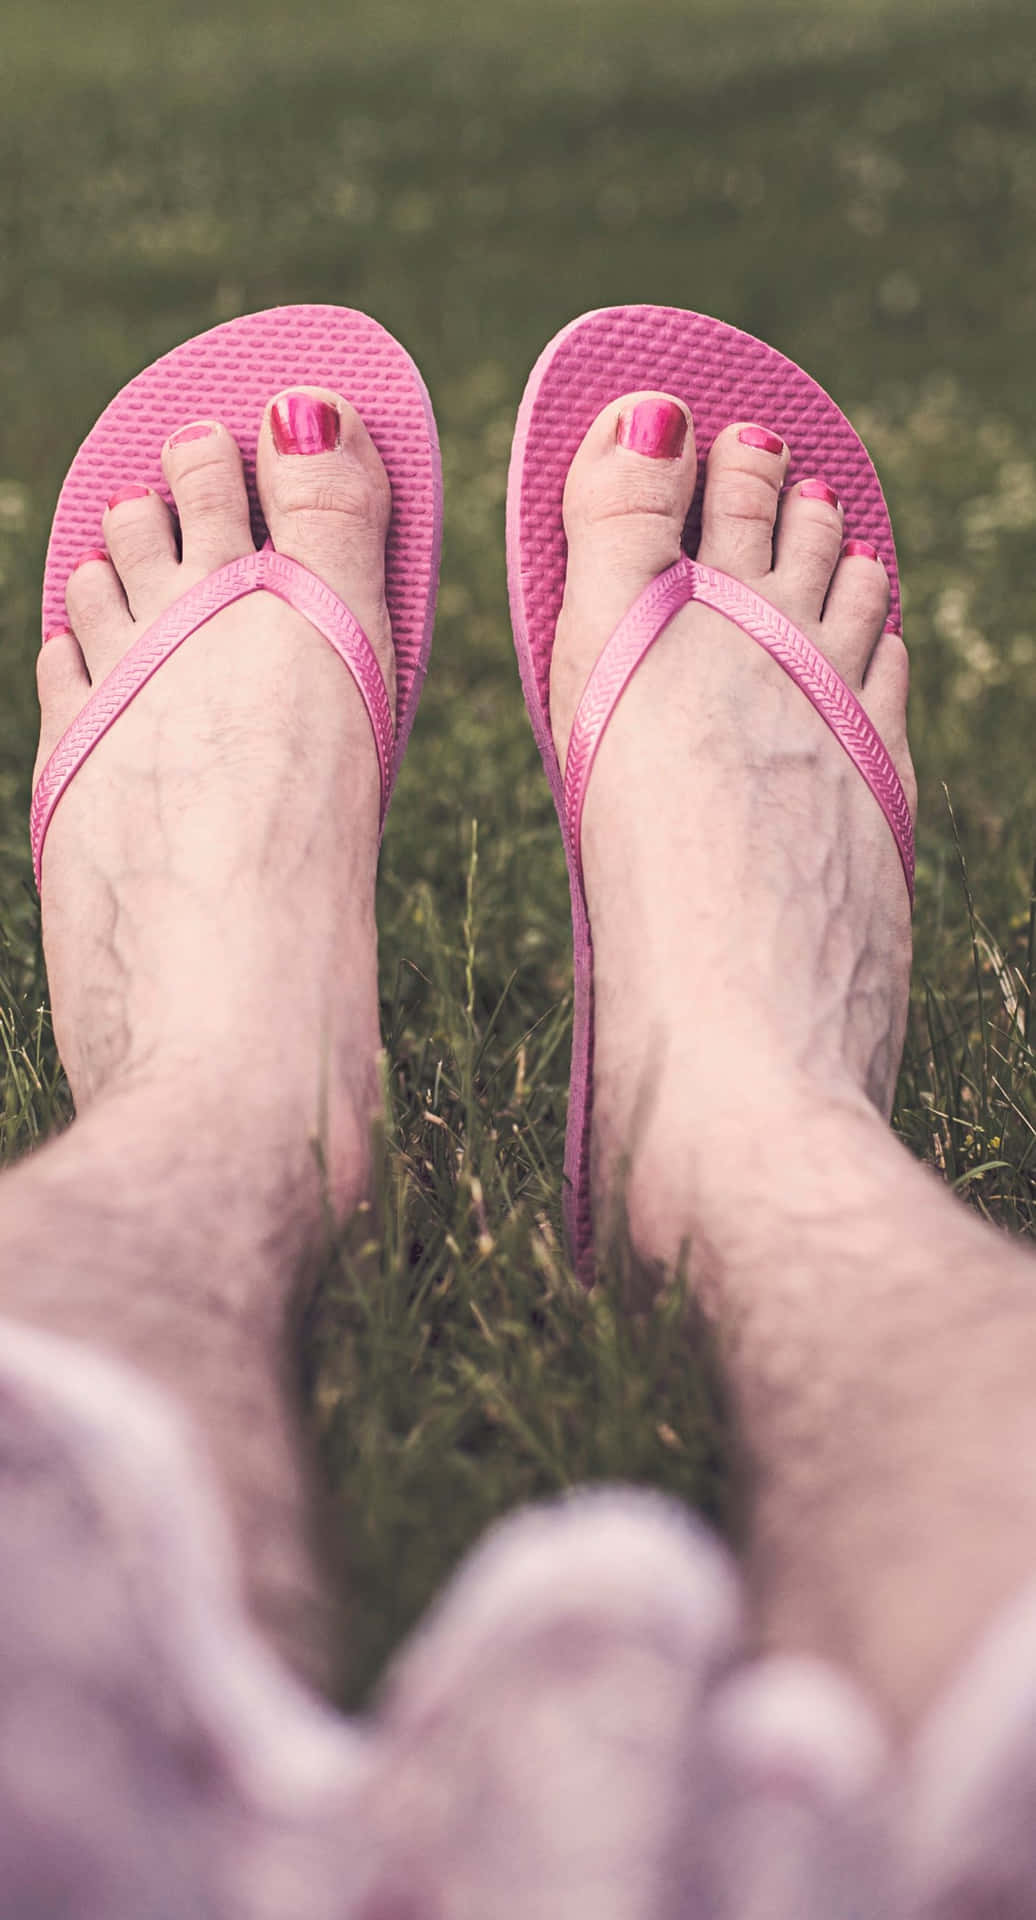 Male Feet With Pink Nail Polish And Slippers Wallpaper